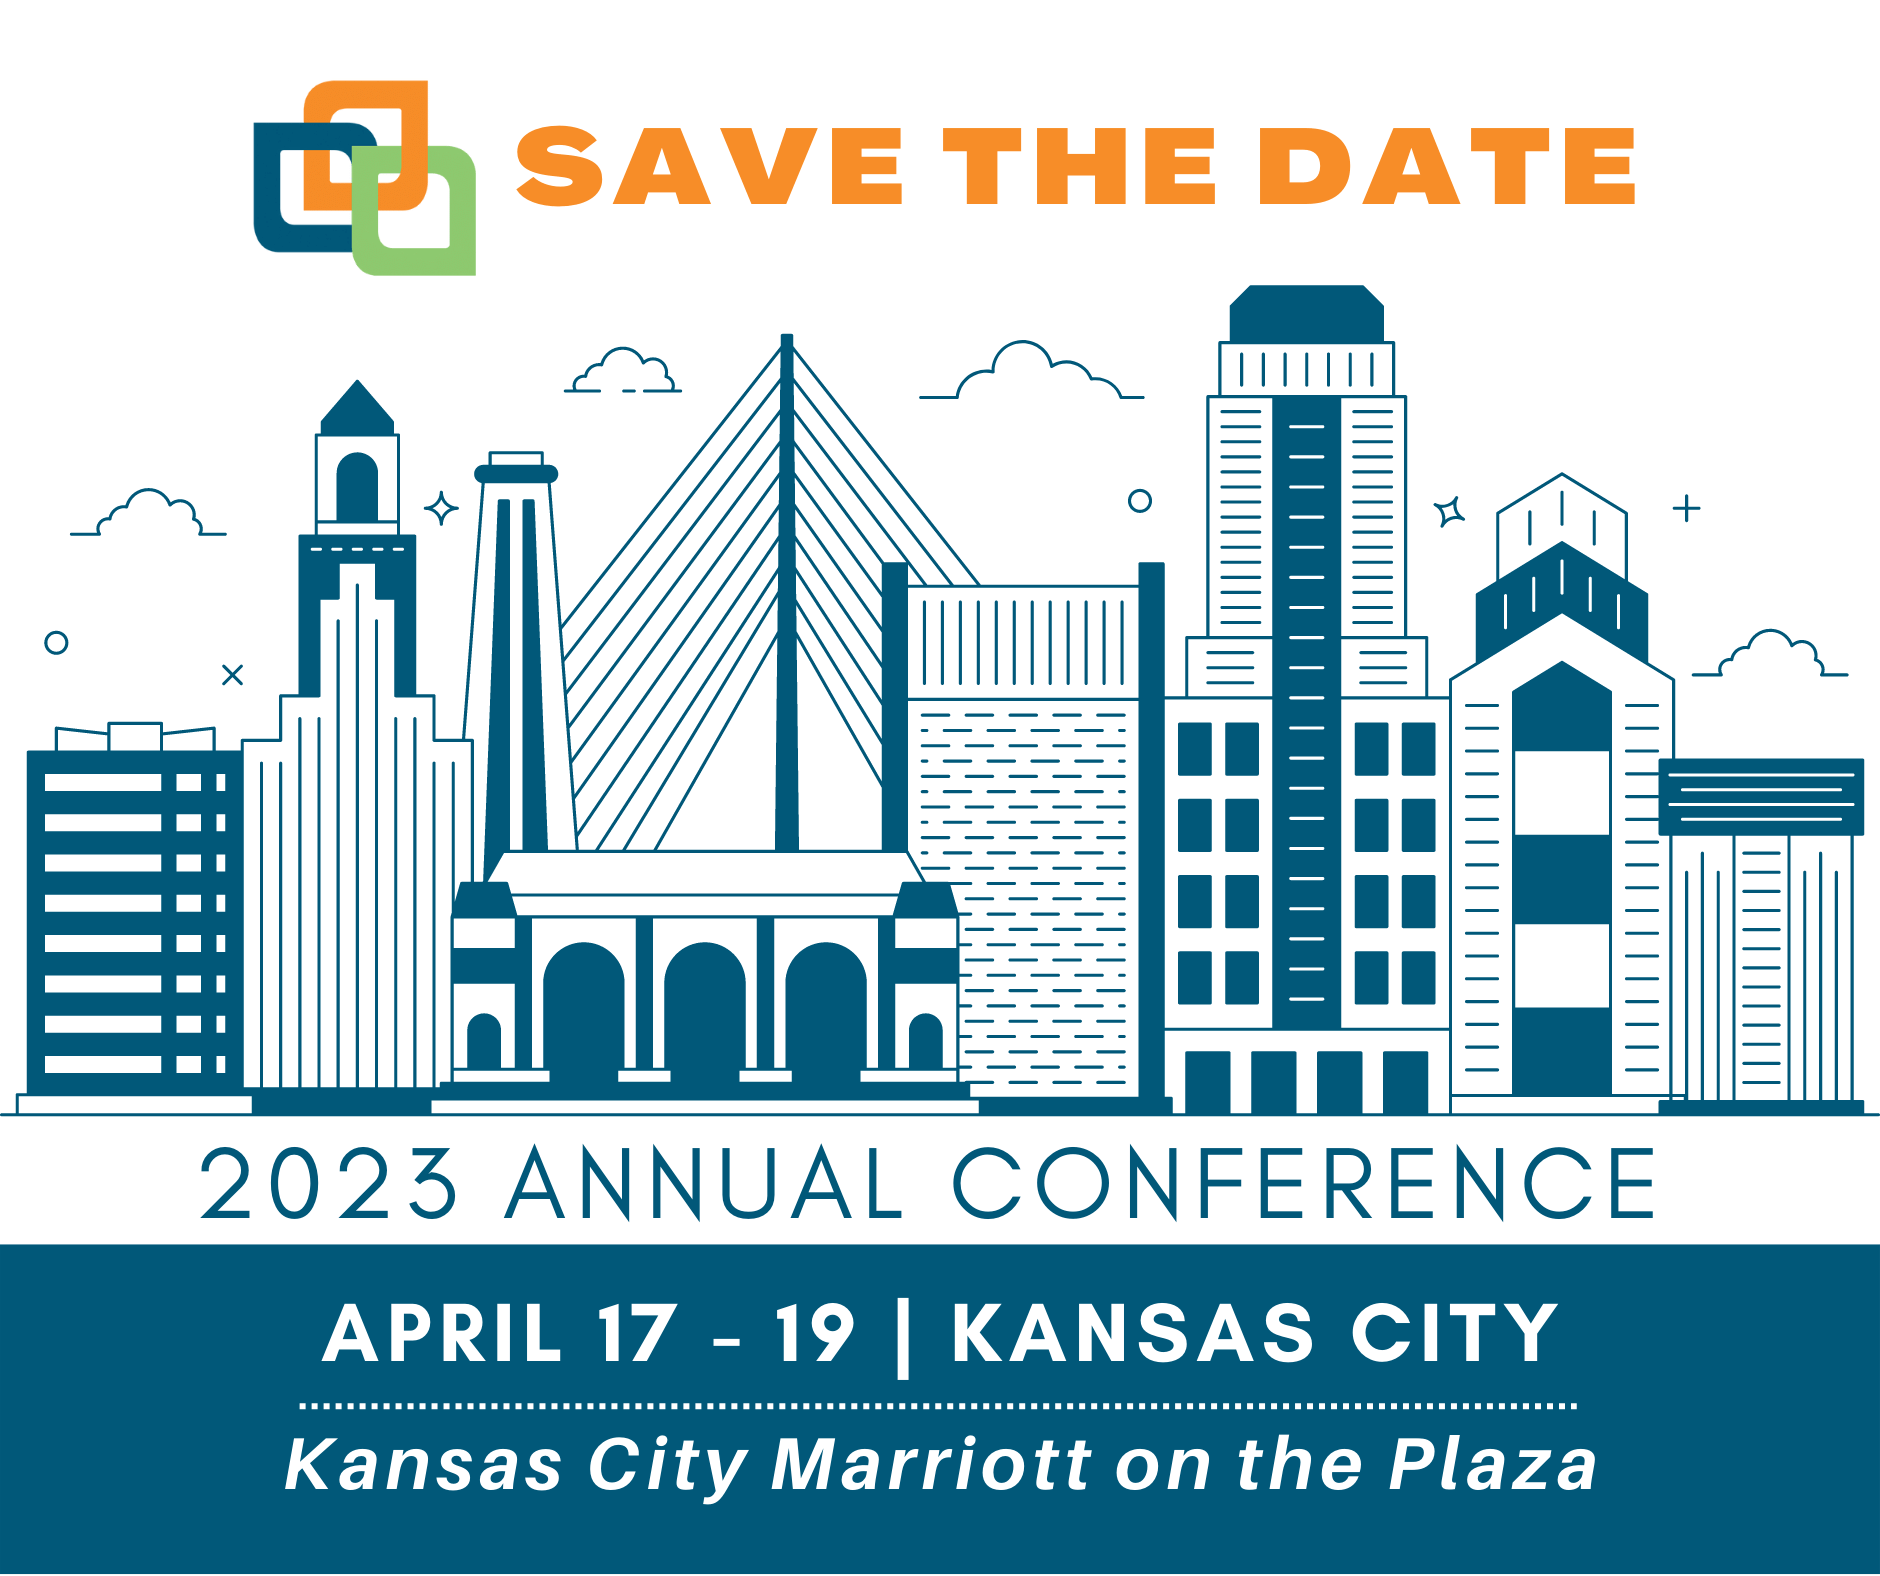 Save the dates of April 17-19, 2023 for the Annual Conference in Kansas City, Missouri. We are returning to the KC Marriott on the Plaza.